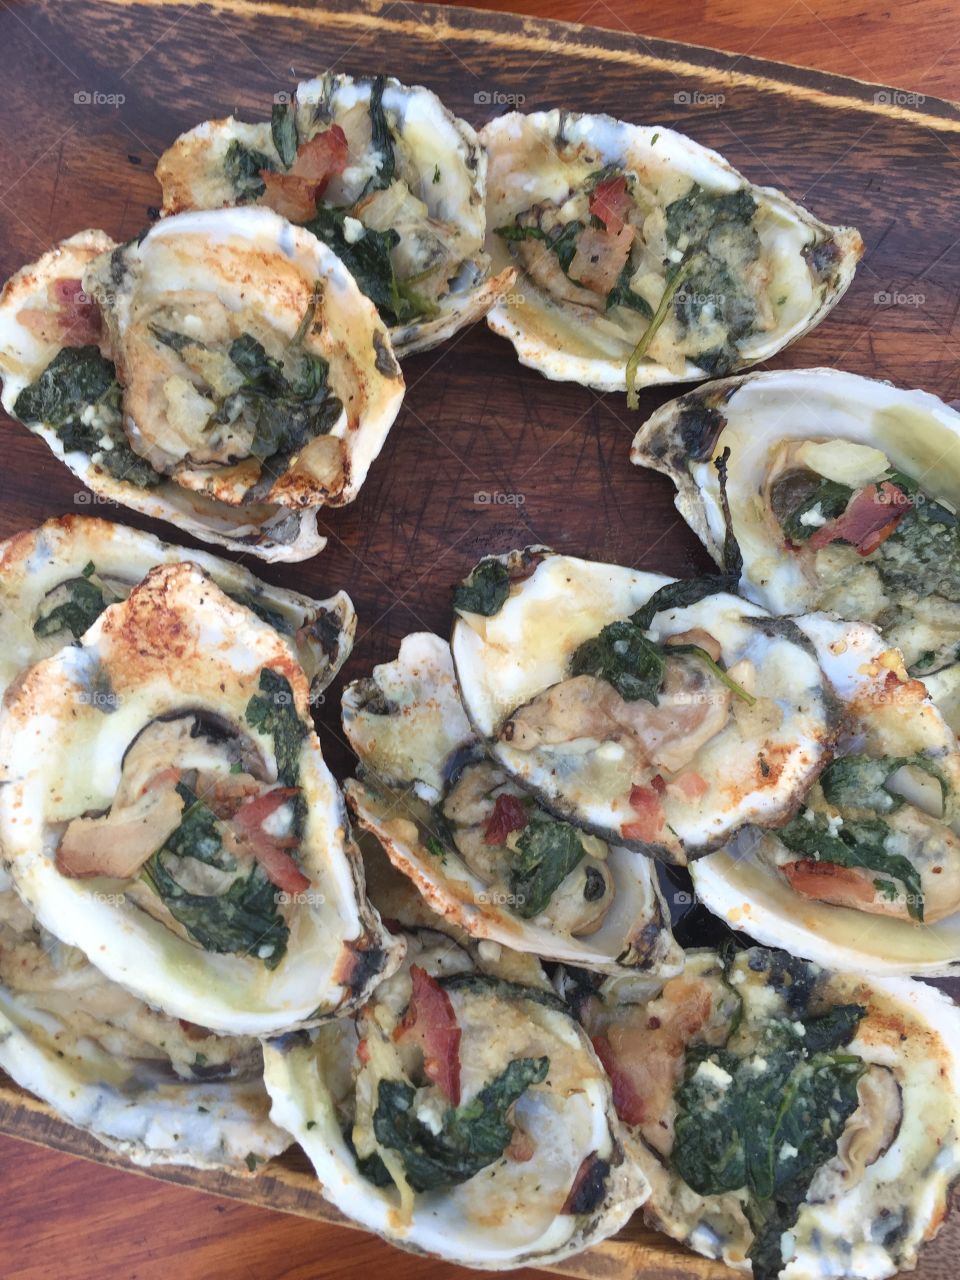 Delicious platter of oysters 